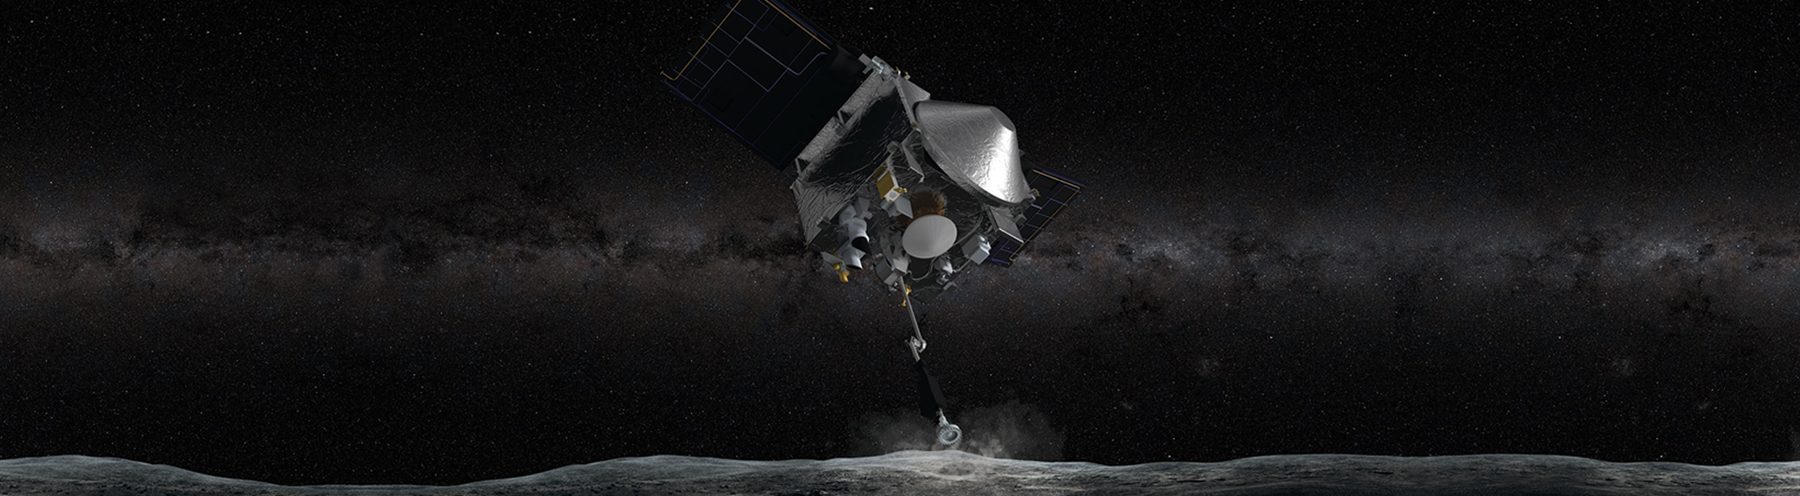 A spacecraft performing a sample collection maneuver on the surface of an asteroid against a star-filled background.